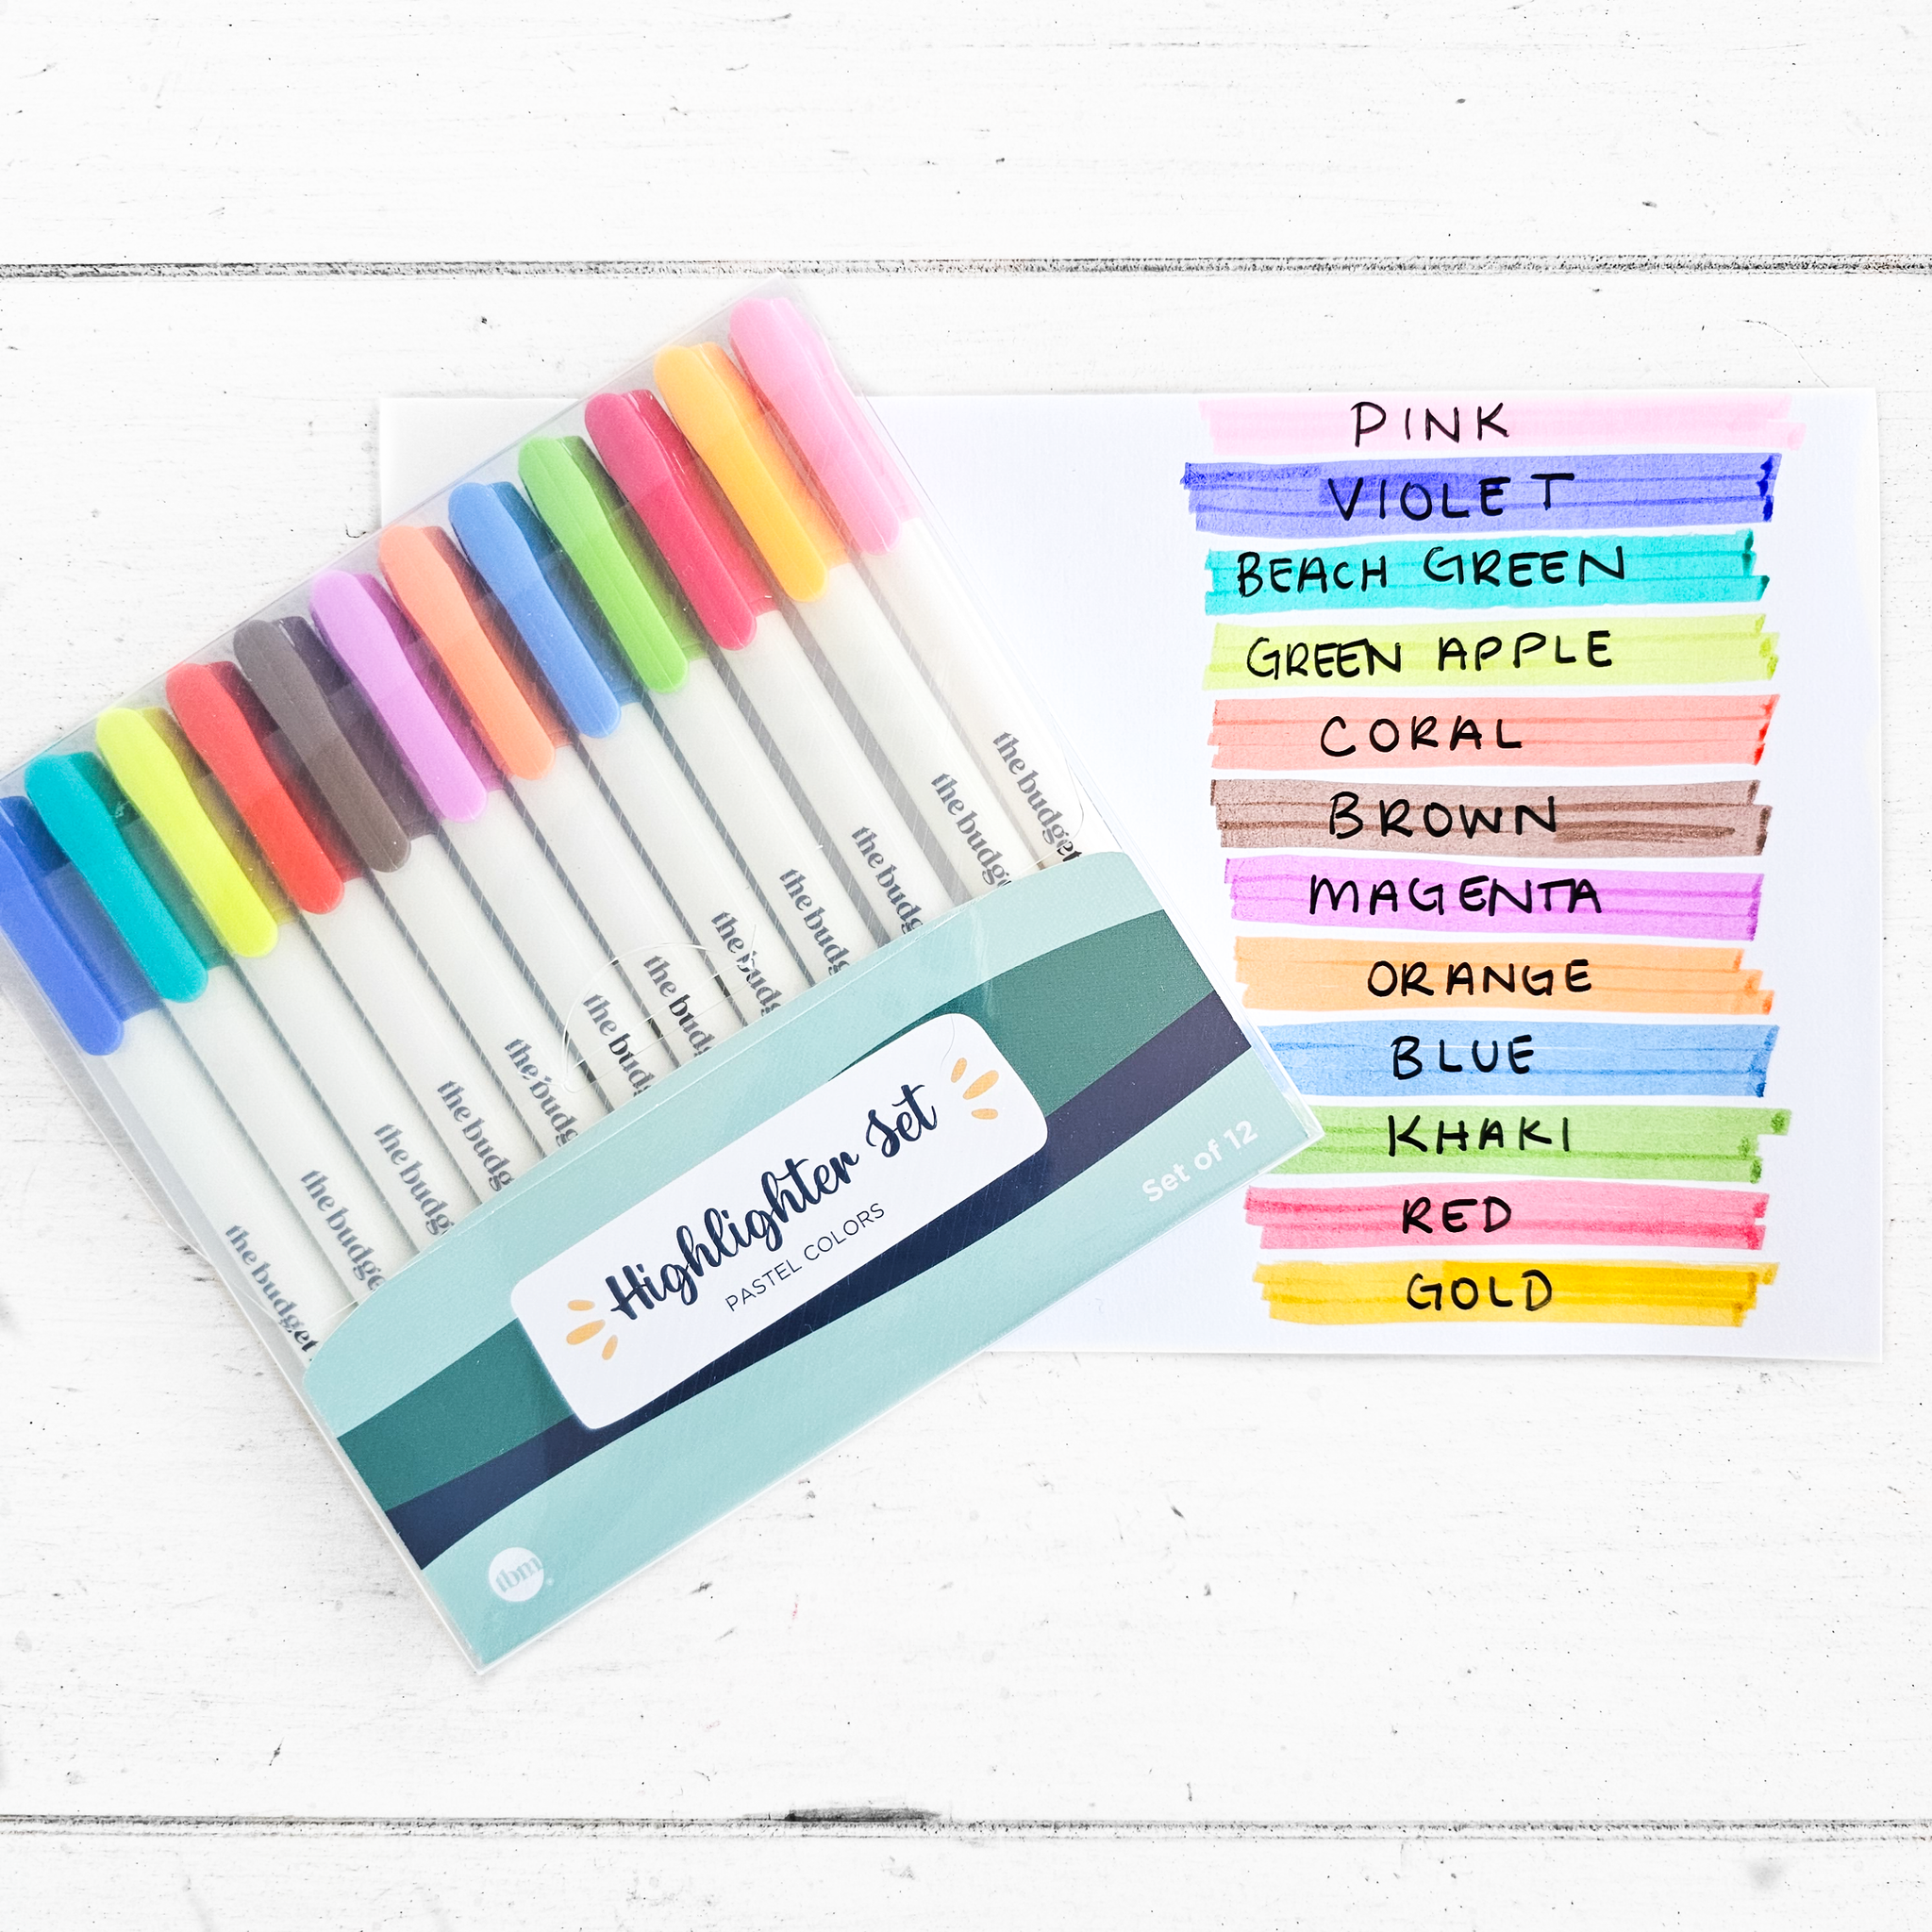 12-Pack TBM Highlighters – The Budget Mom